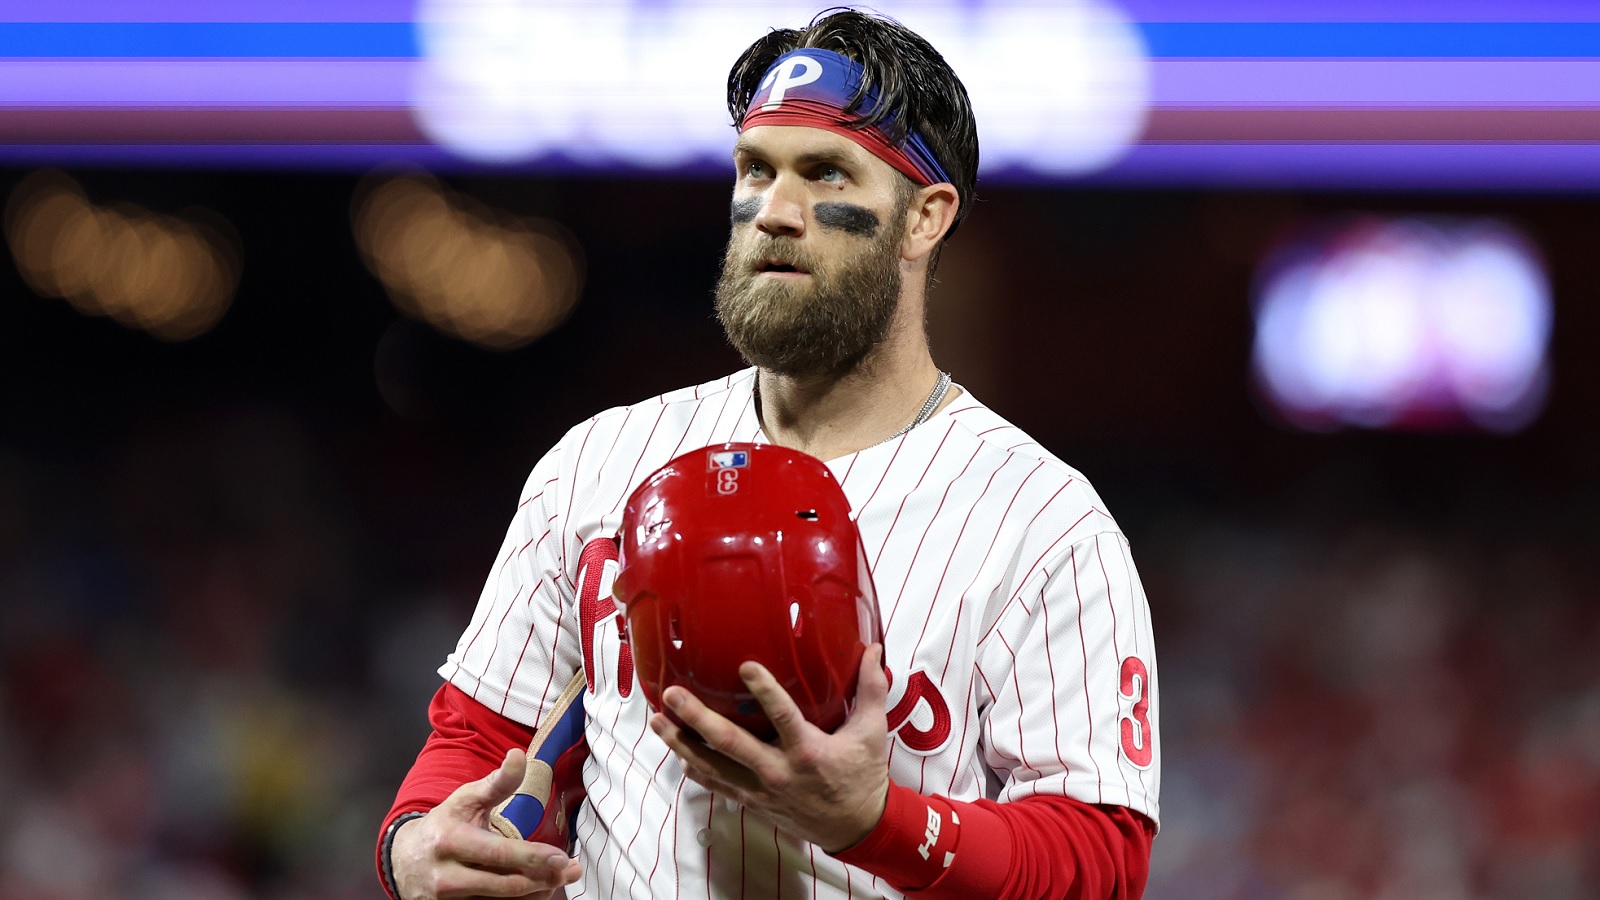 Bryce Harper pulls interesting move to try to break out of slump